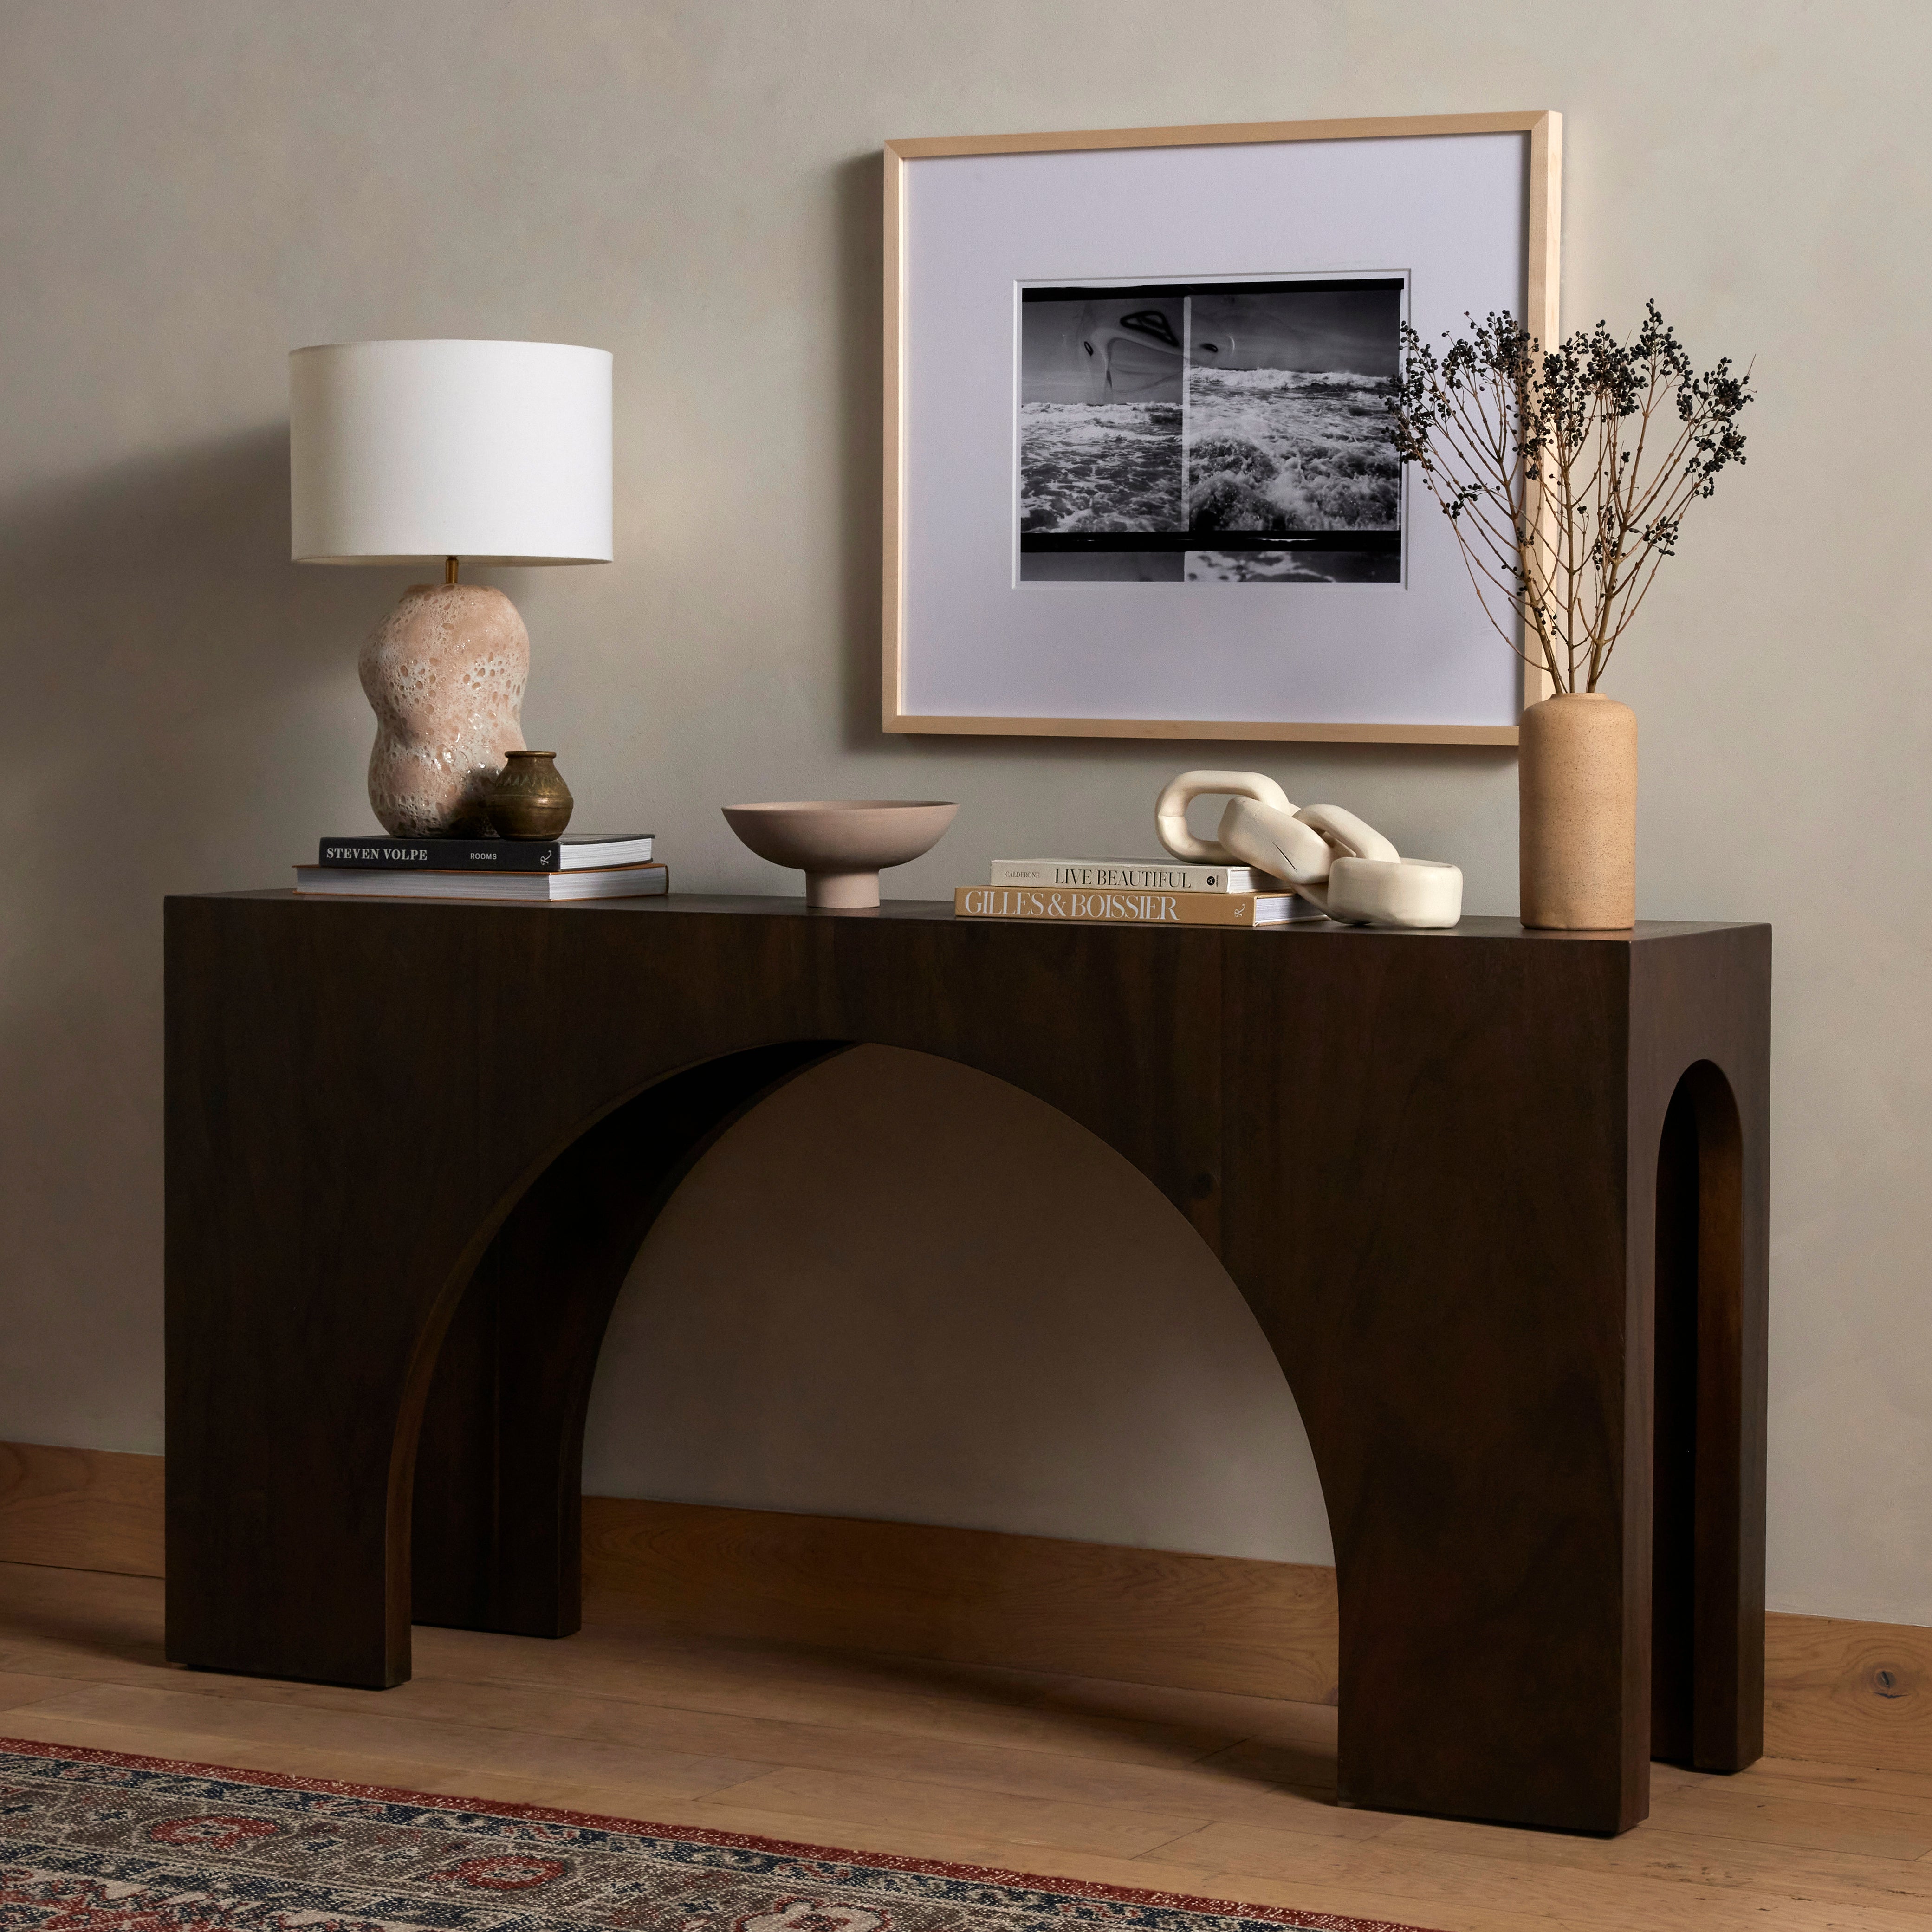 Clean and simple, with great impact. Made from smoked Guanacaste, shapely arches and block corners speak to the architectural inspiration behind this eye-catching console table. Amethyst Home provides interior design, new construction, custom furniture, and area rugs in the Kansas City metro area.